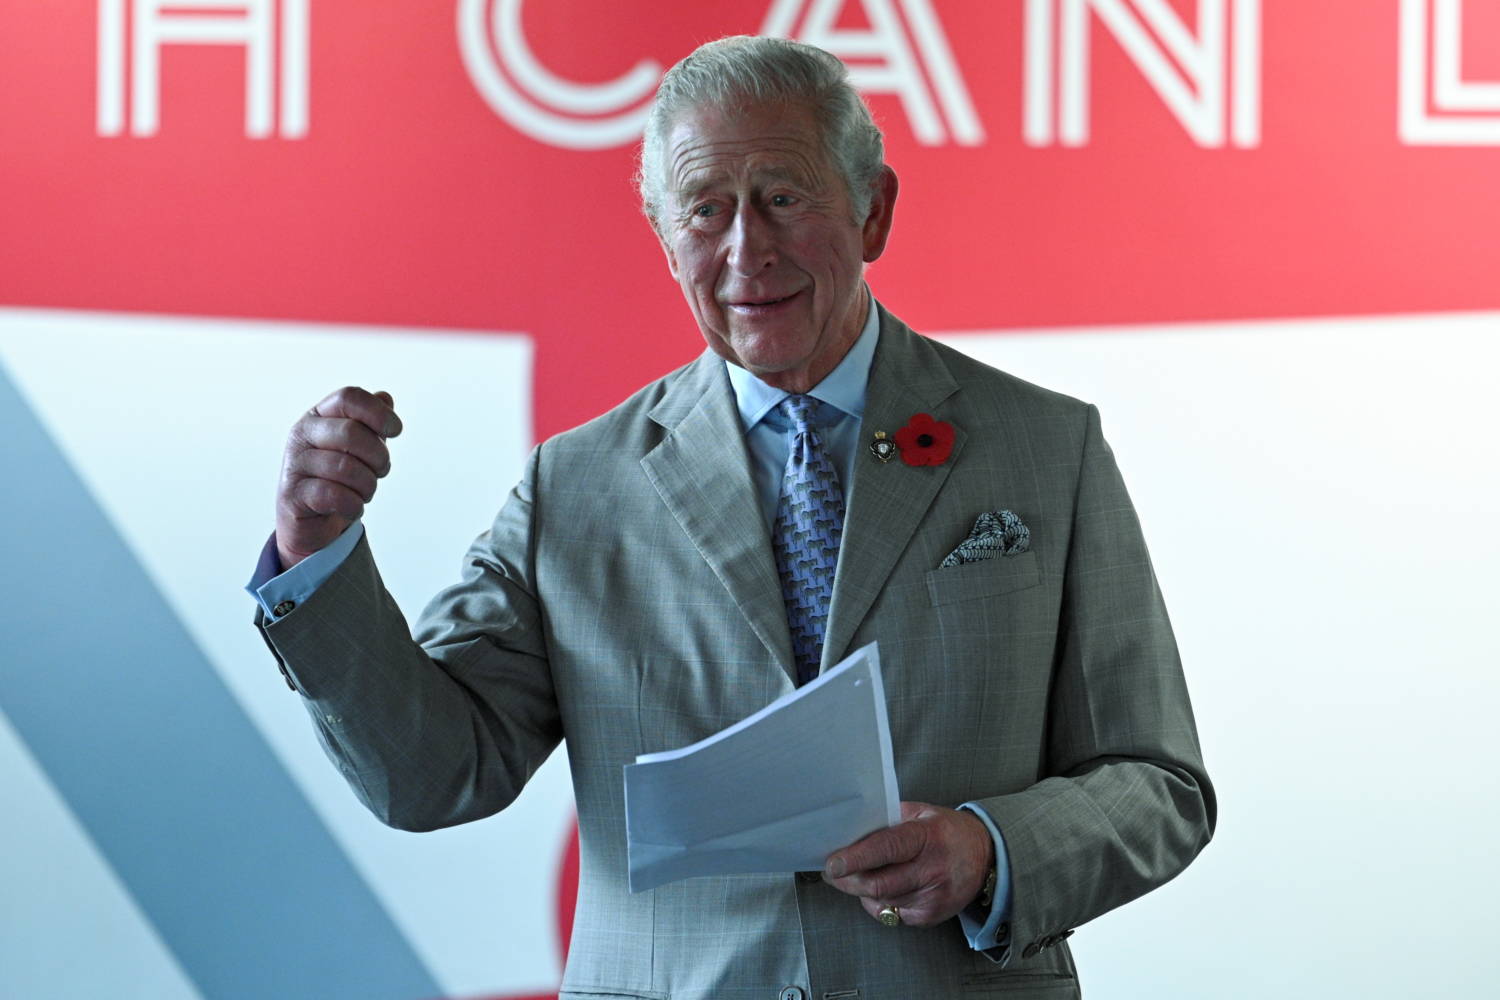 Britain's Prince Charles Visits Cheryl's Trust Centre In Newcastle Upon Tyne